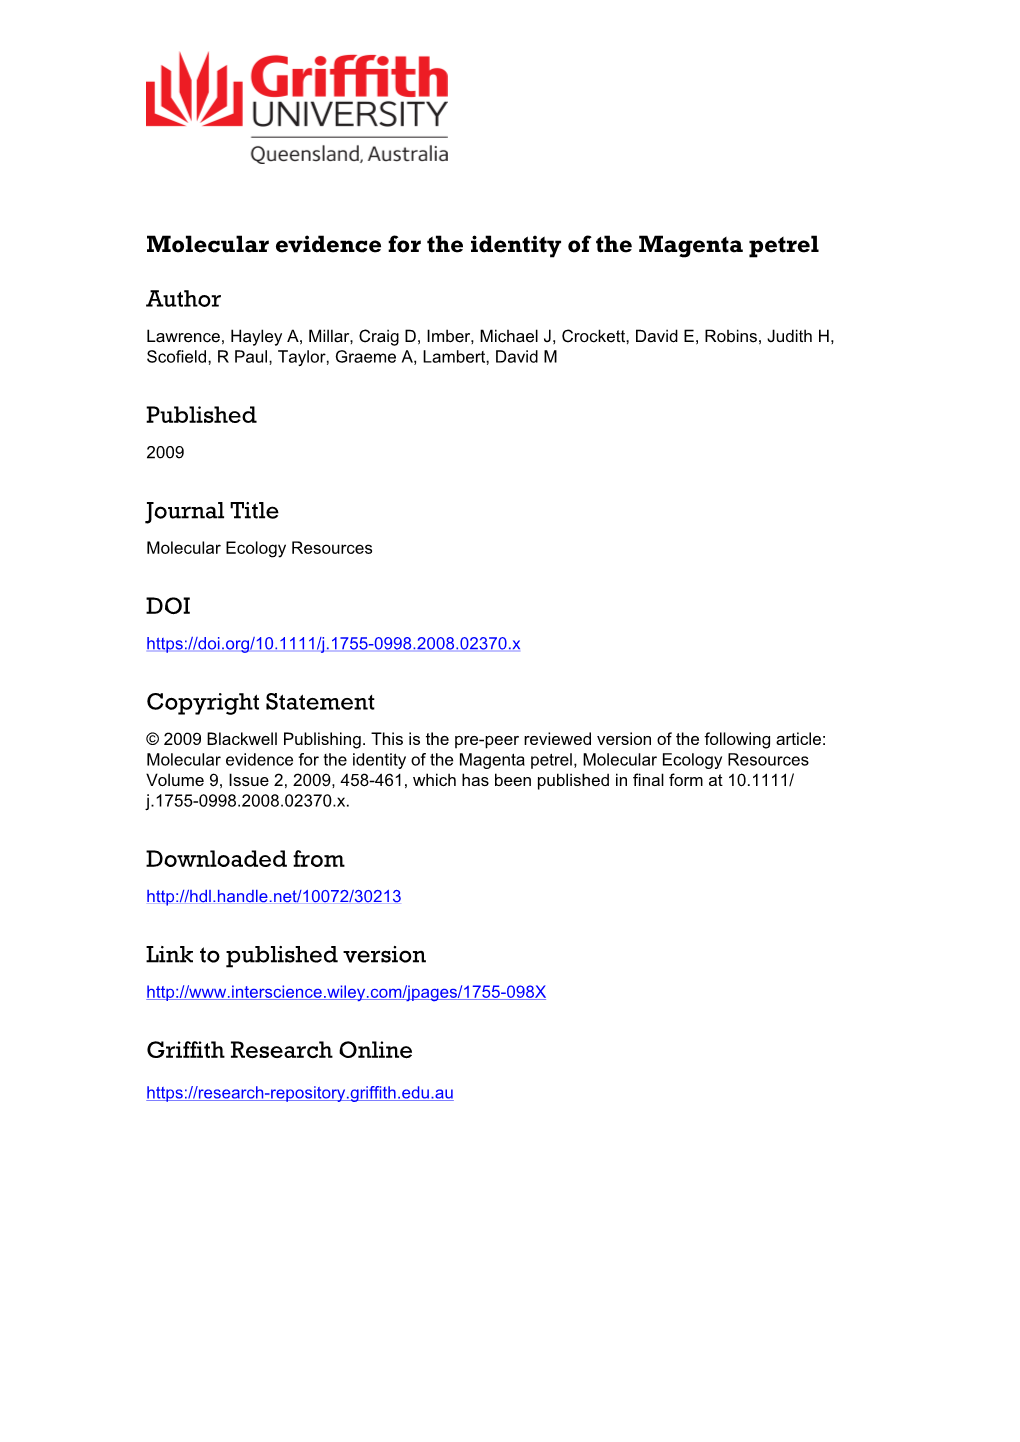 Molecular Evidence for the Identity of the Magenta Petrel